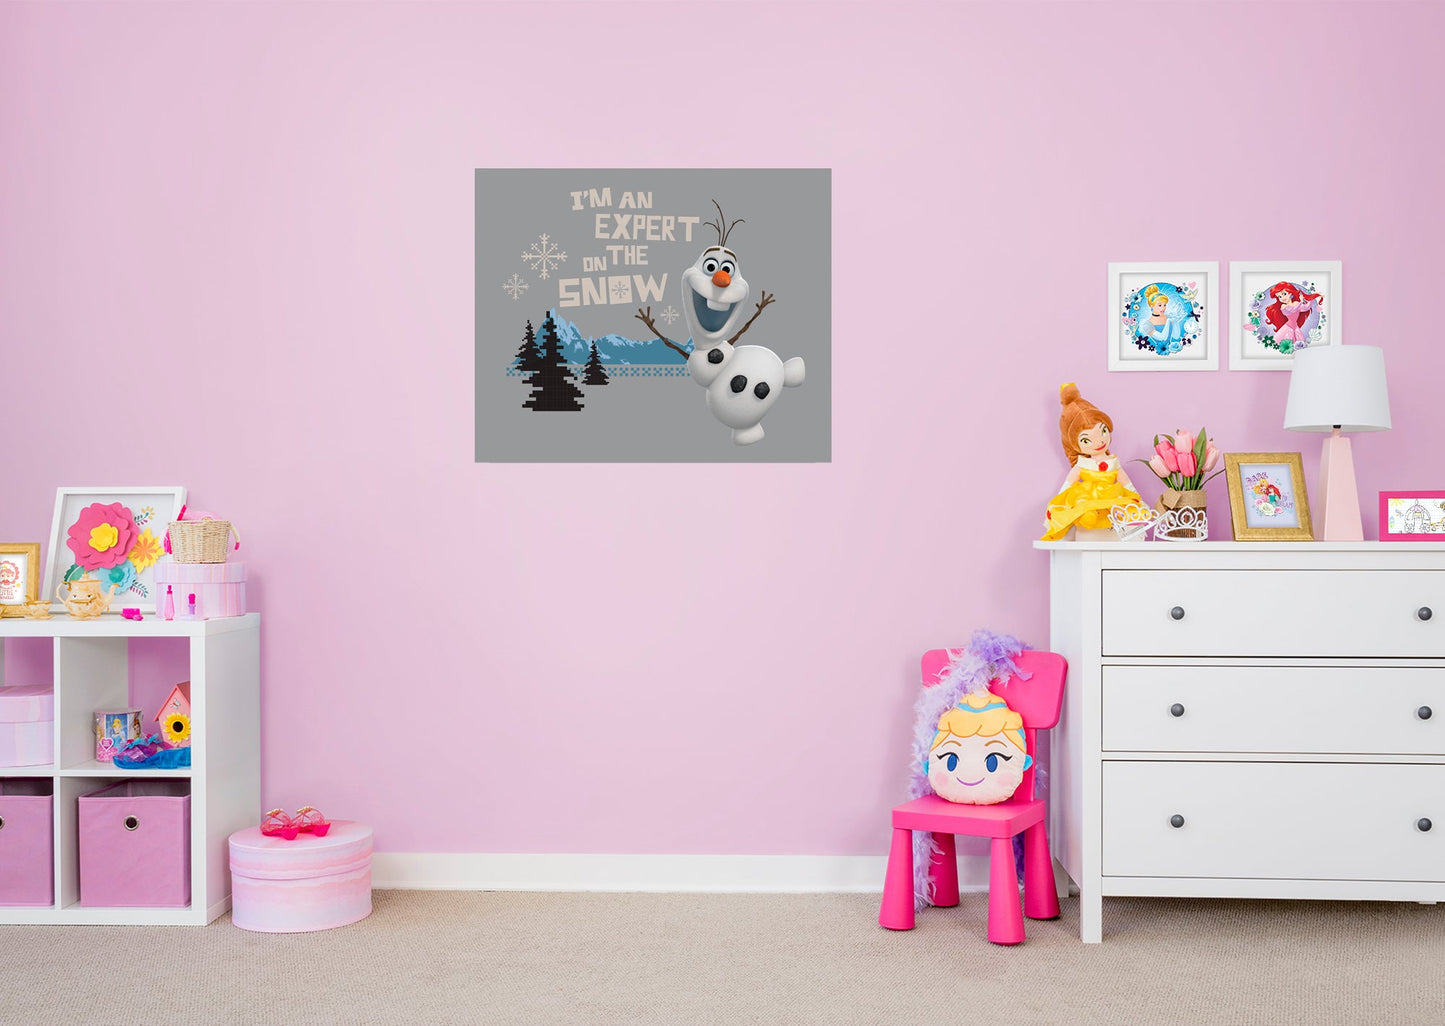 Frozen:  Expert on Snow Mural        - Officially Licensed Disney Removable     Adhesive Decal